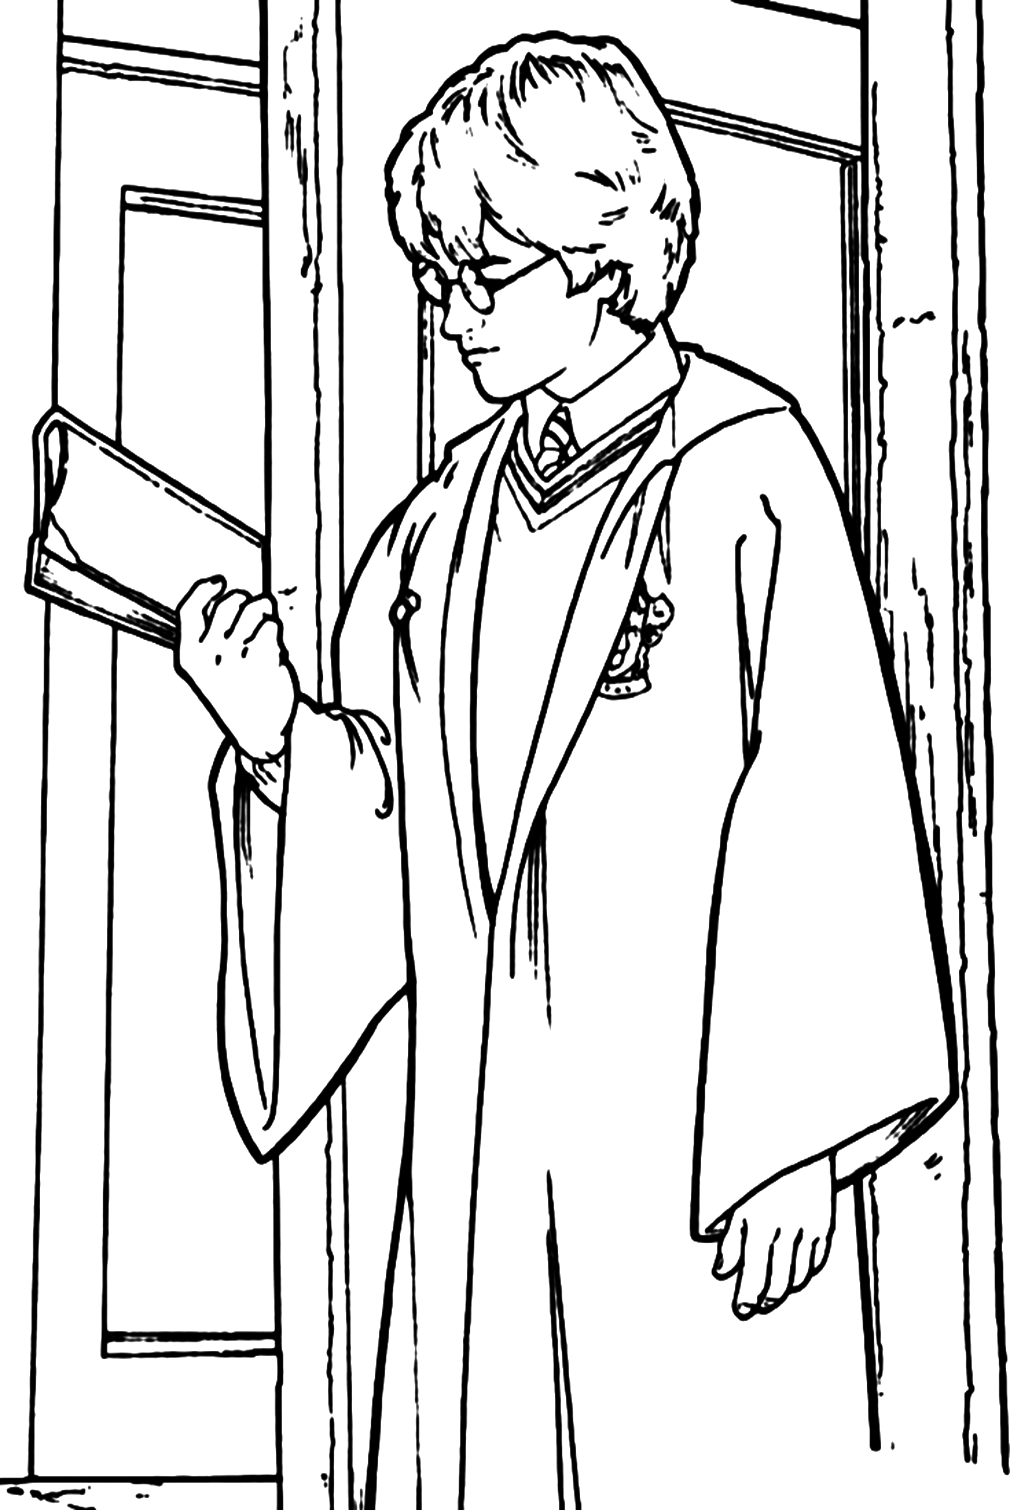 Harry Potter and Book Coloring Pages